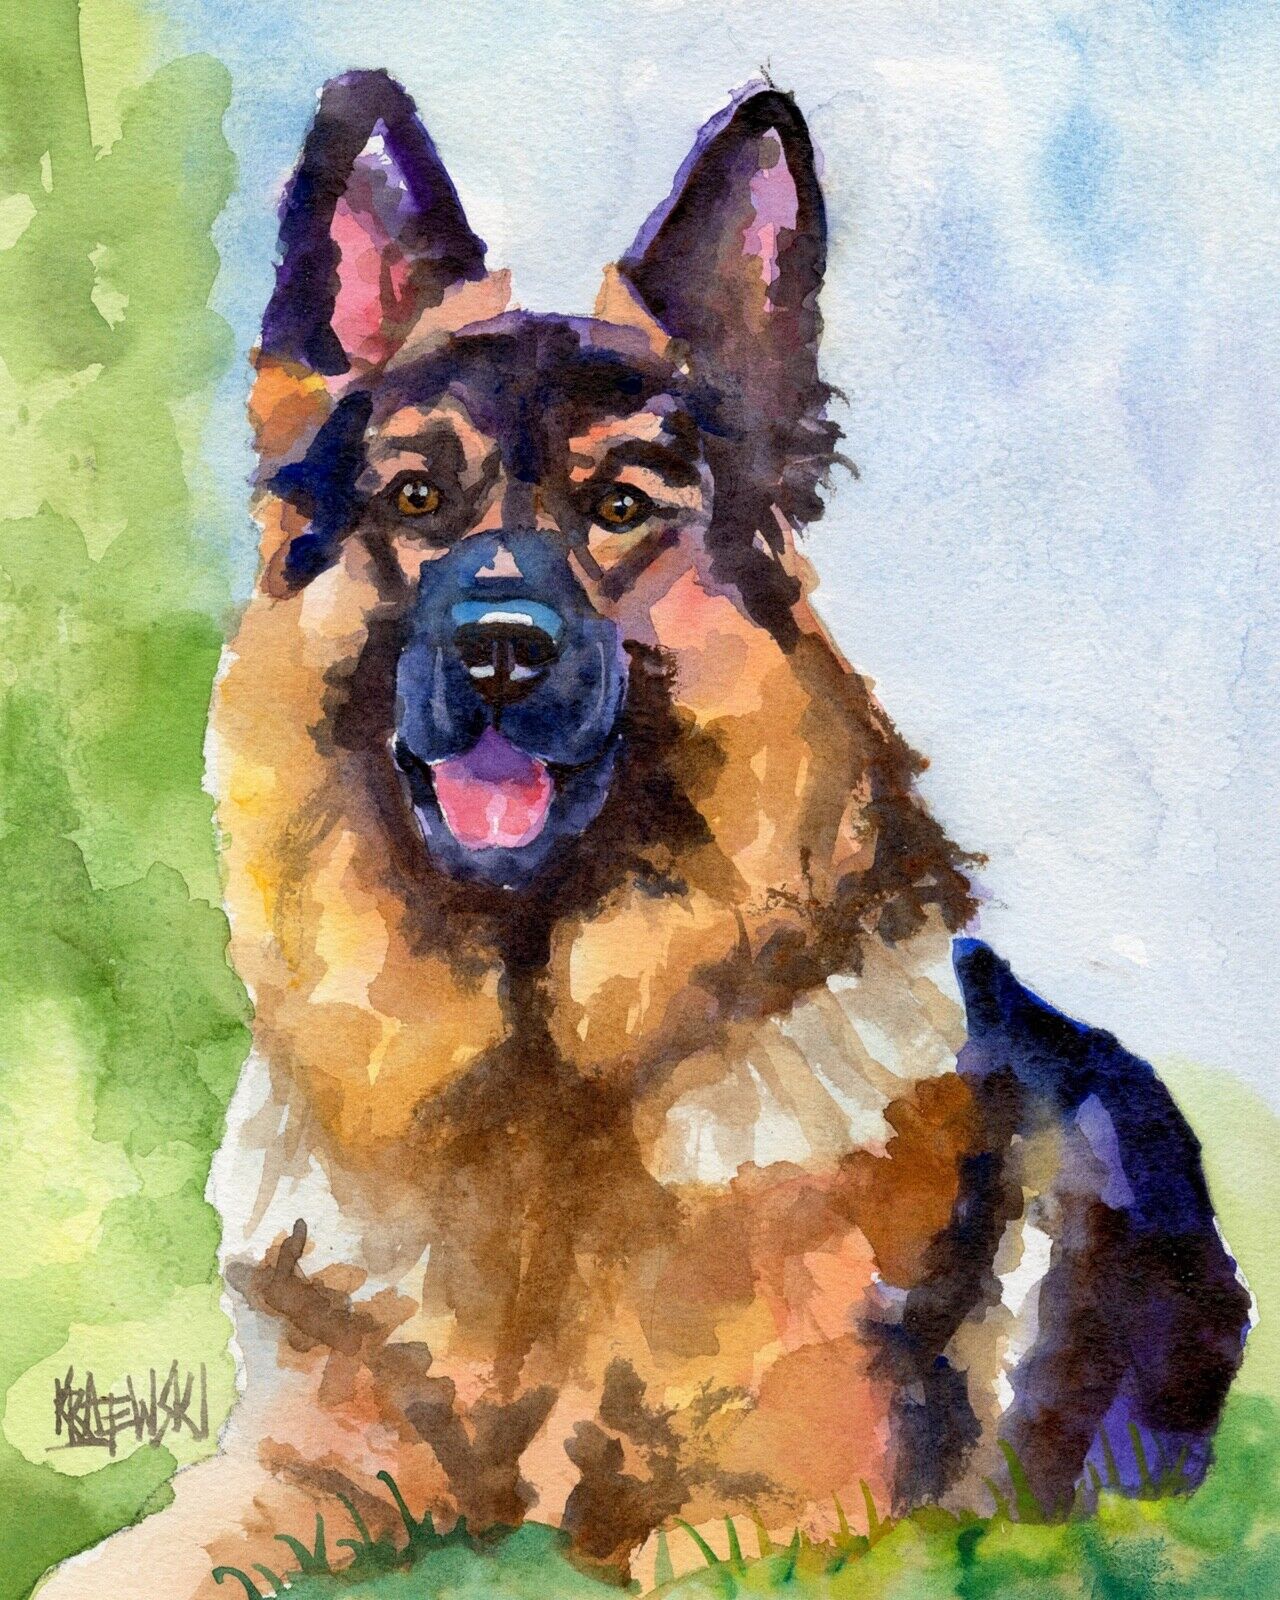 German Shepherd Art Print from Painting | K9 gifts, Poster, Picture, 8x10